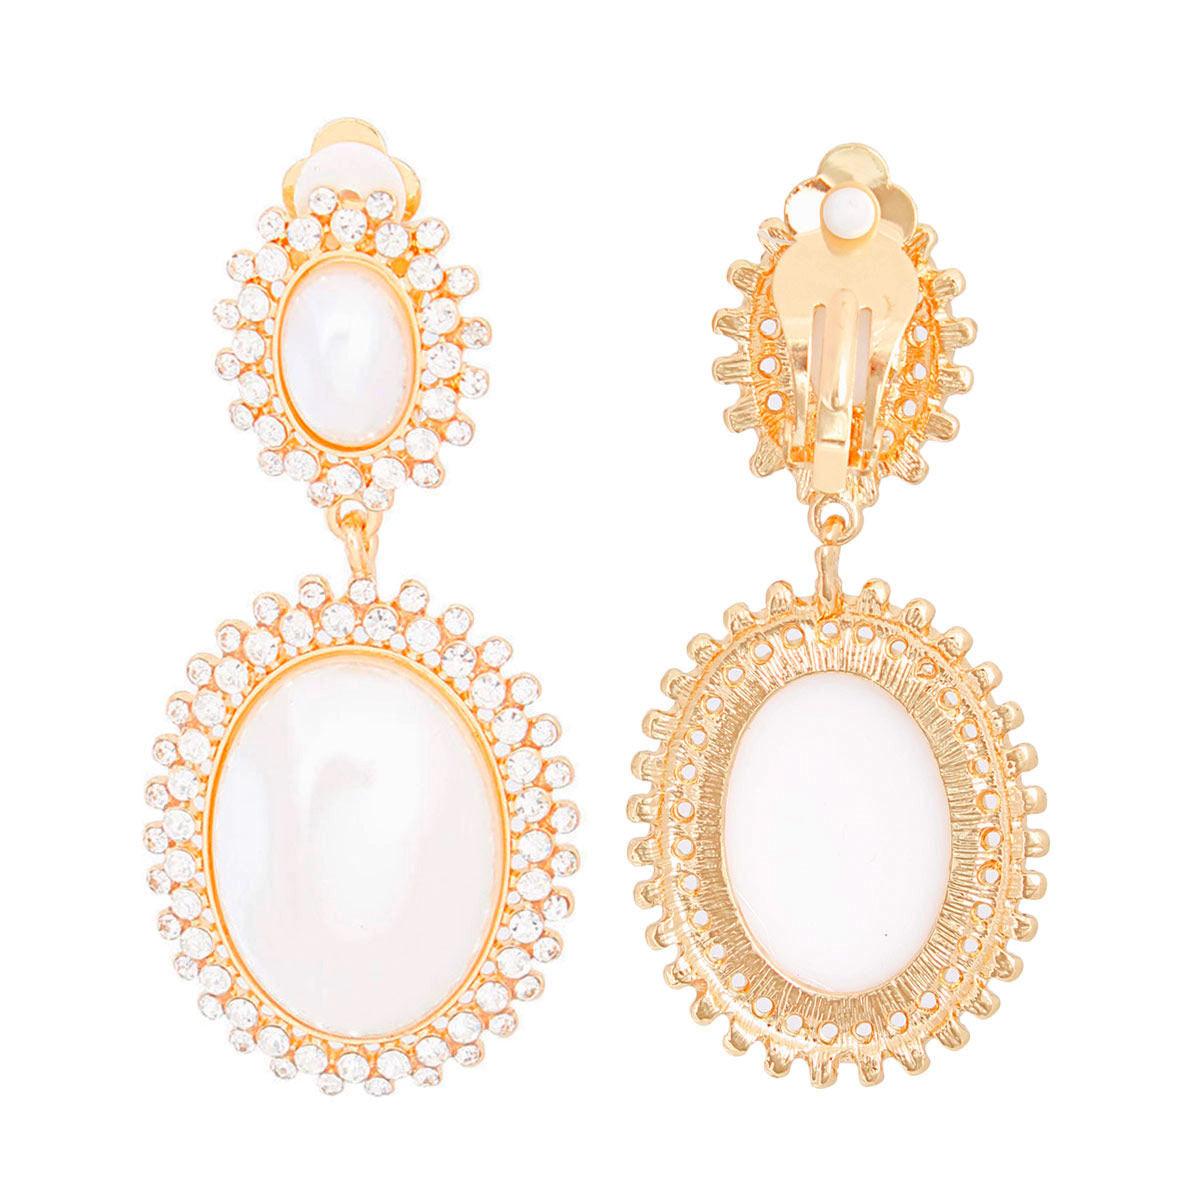 Elevate Your Style: Gold Faux Pearl Halo Earrings for Women - Fashion Jewelry